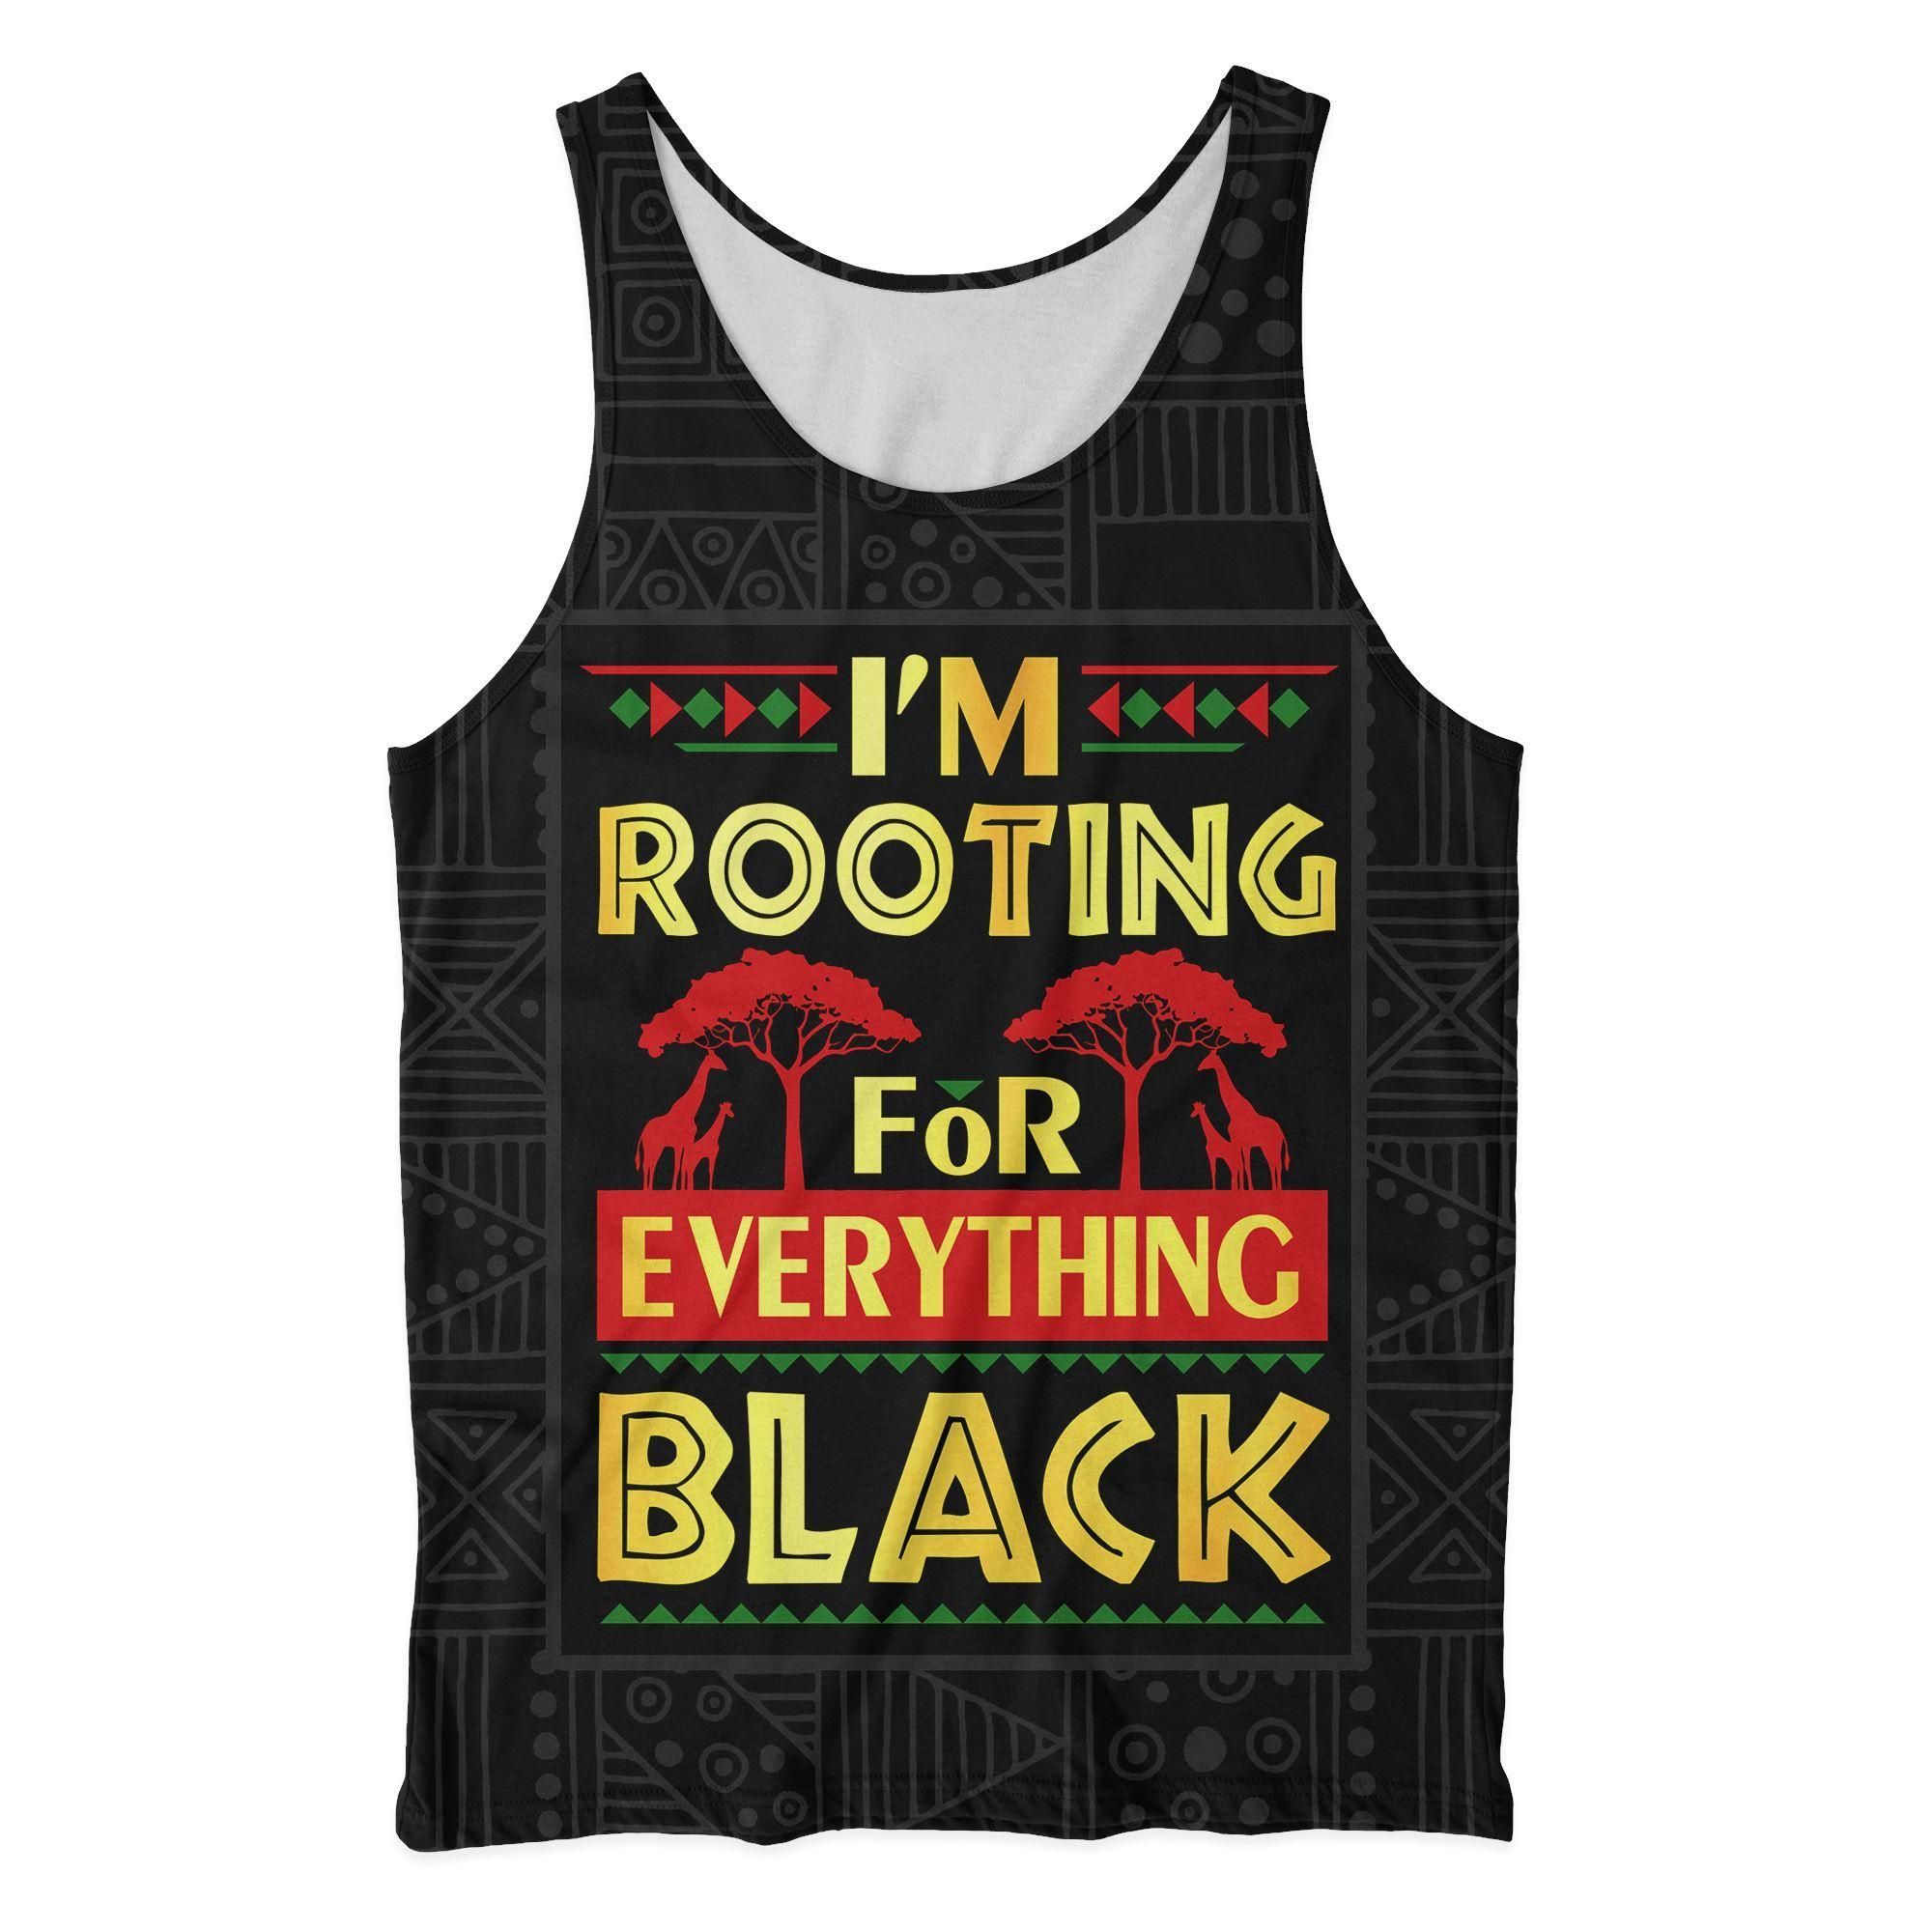 I'm Rooting For Everything Black Tank Top